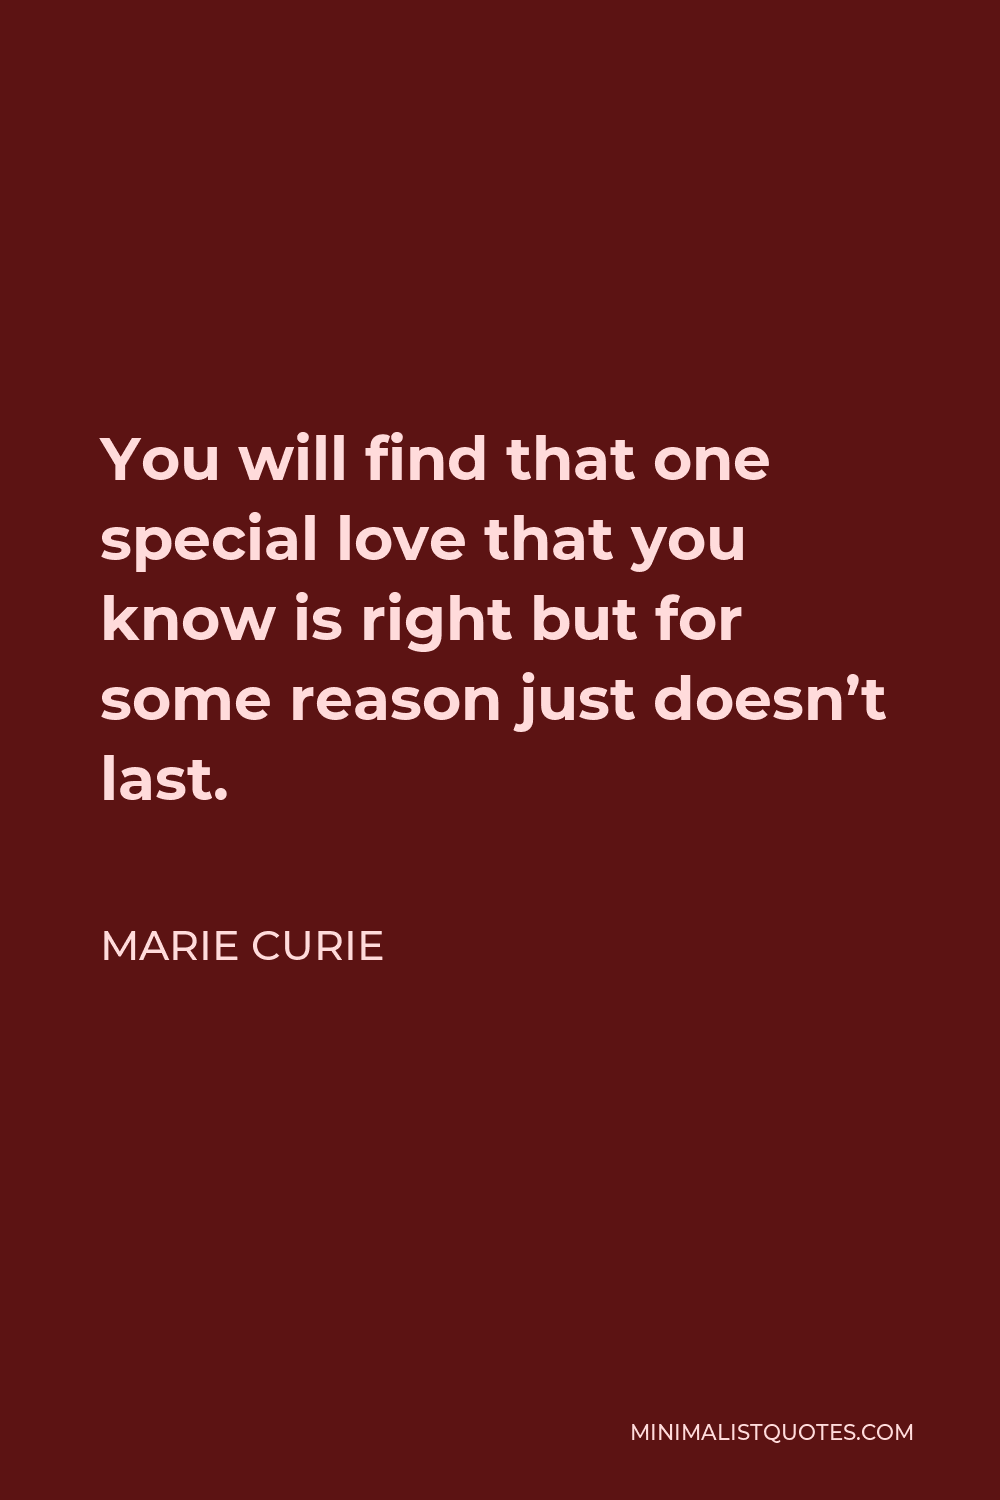 Marie Curie Quote - You will find that one special love that you know is right but for some reason just doesn’t last.